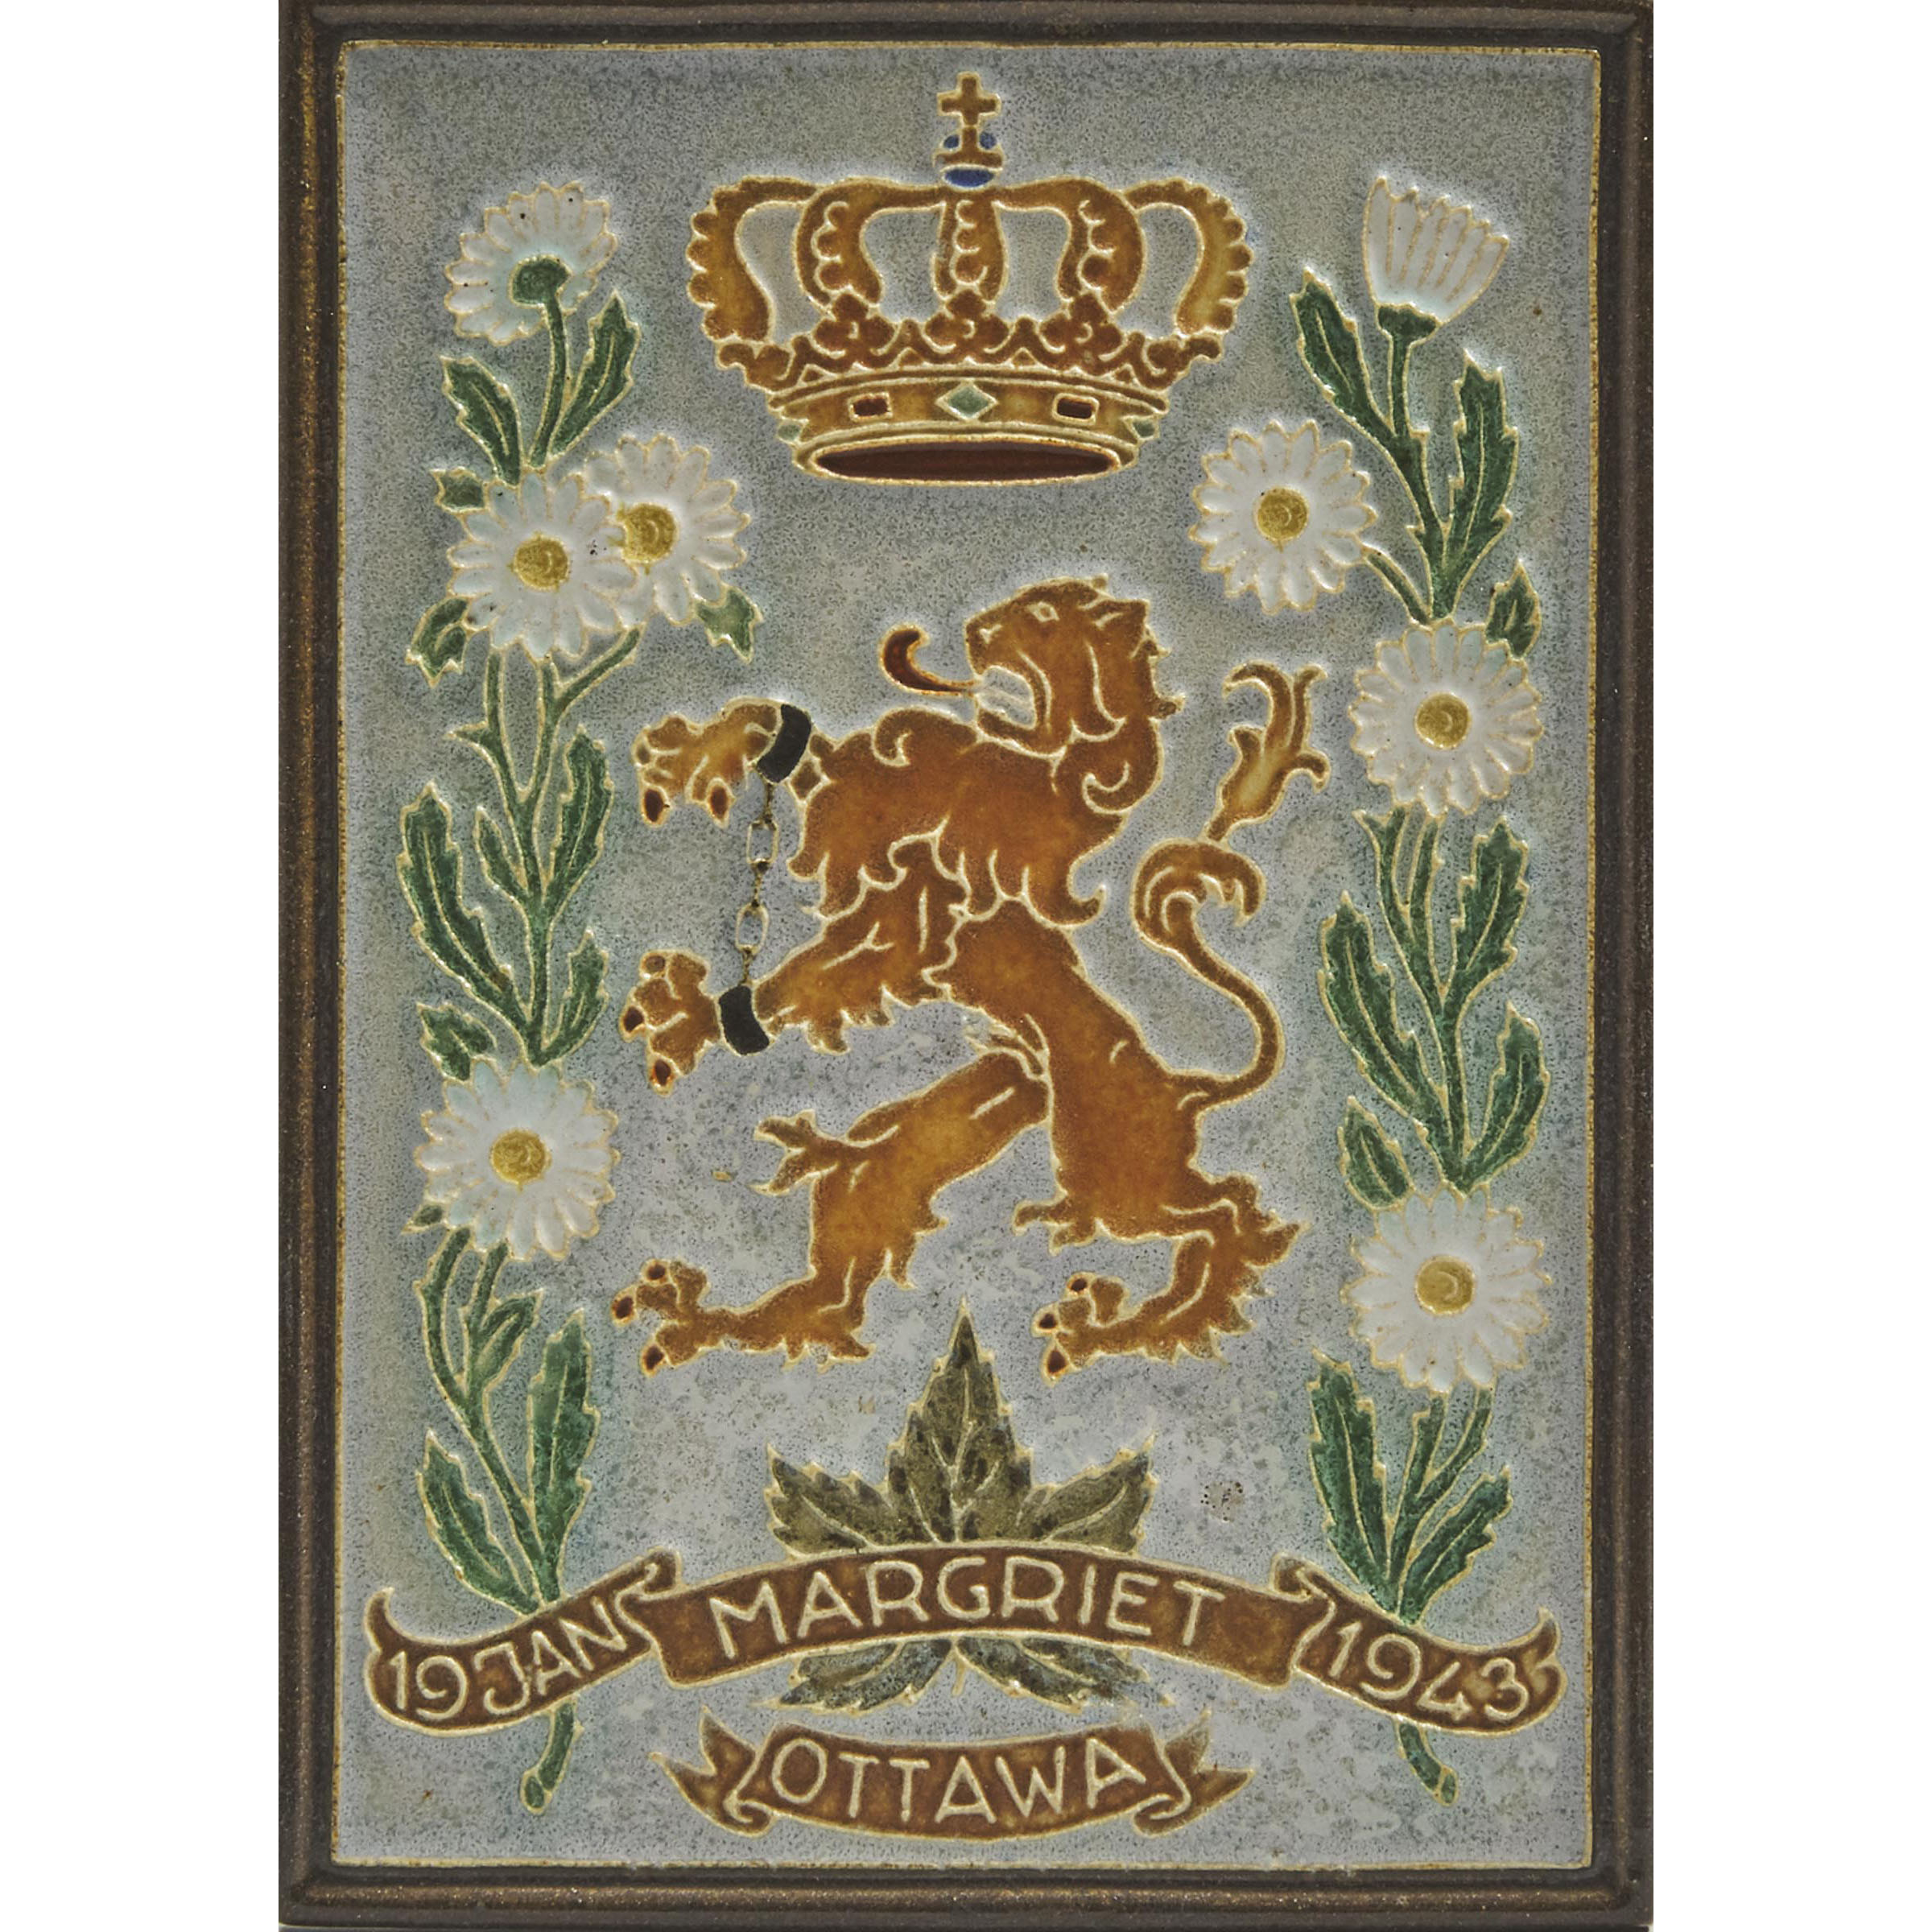 Delft Pottery Tile Commemorating the Birth of Princess Margriet of the Netherlands in Ottawa, Canada, 1943